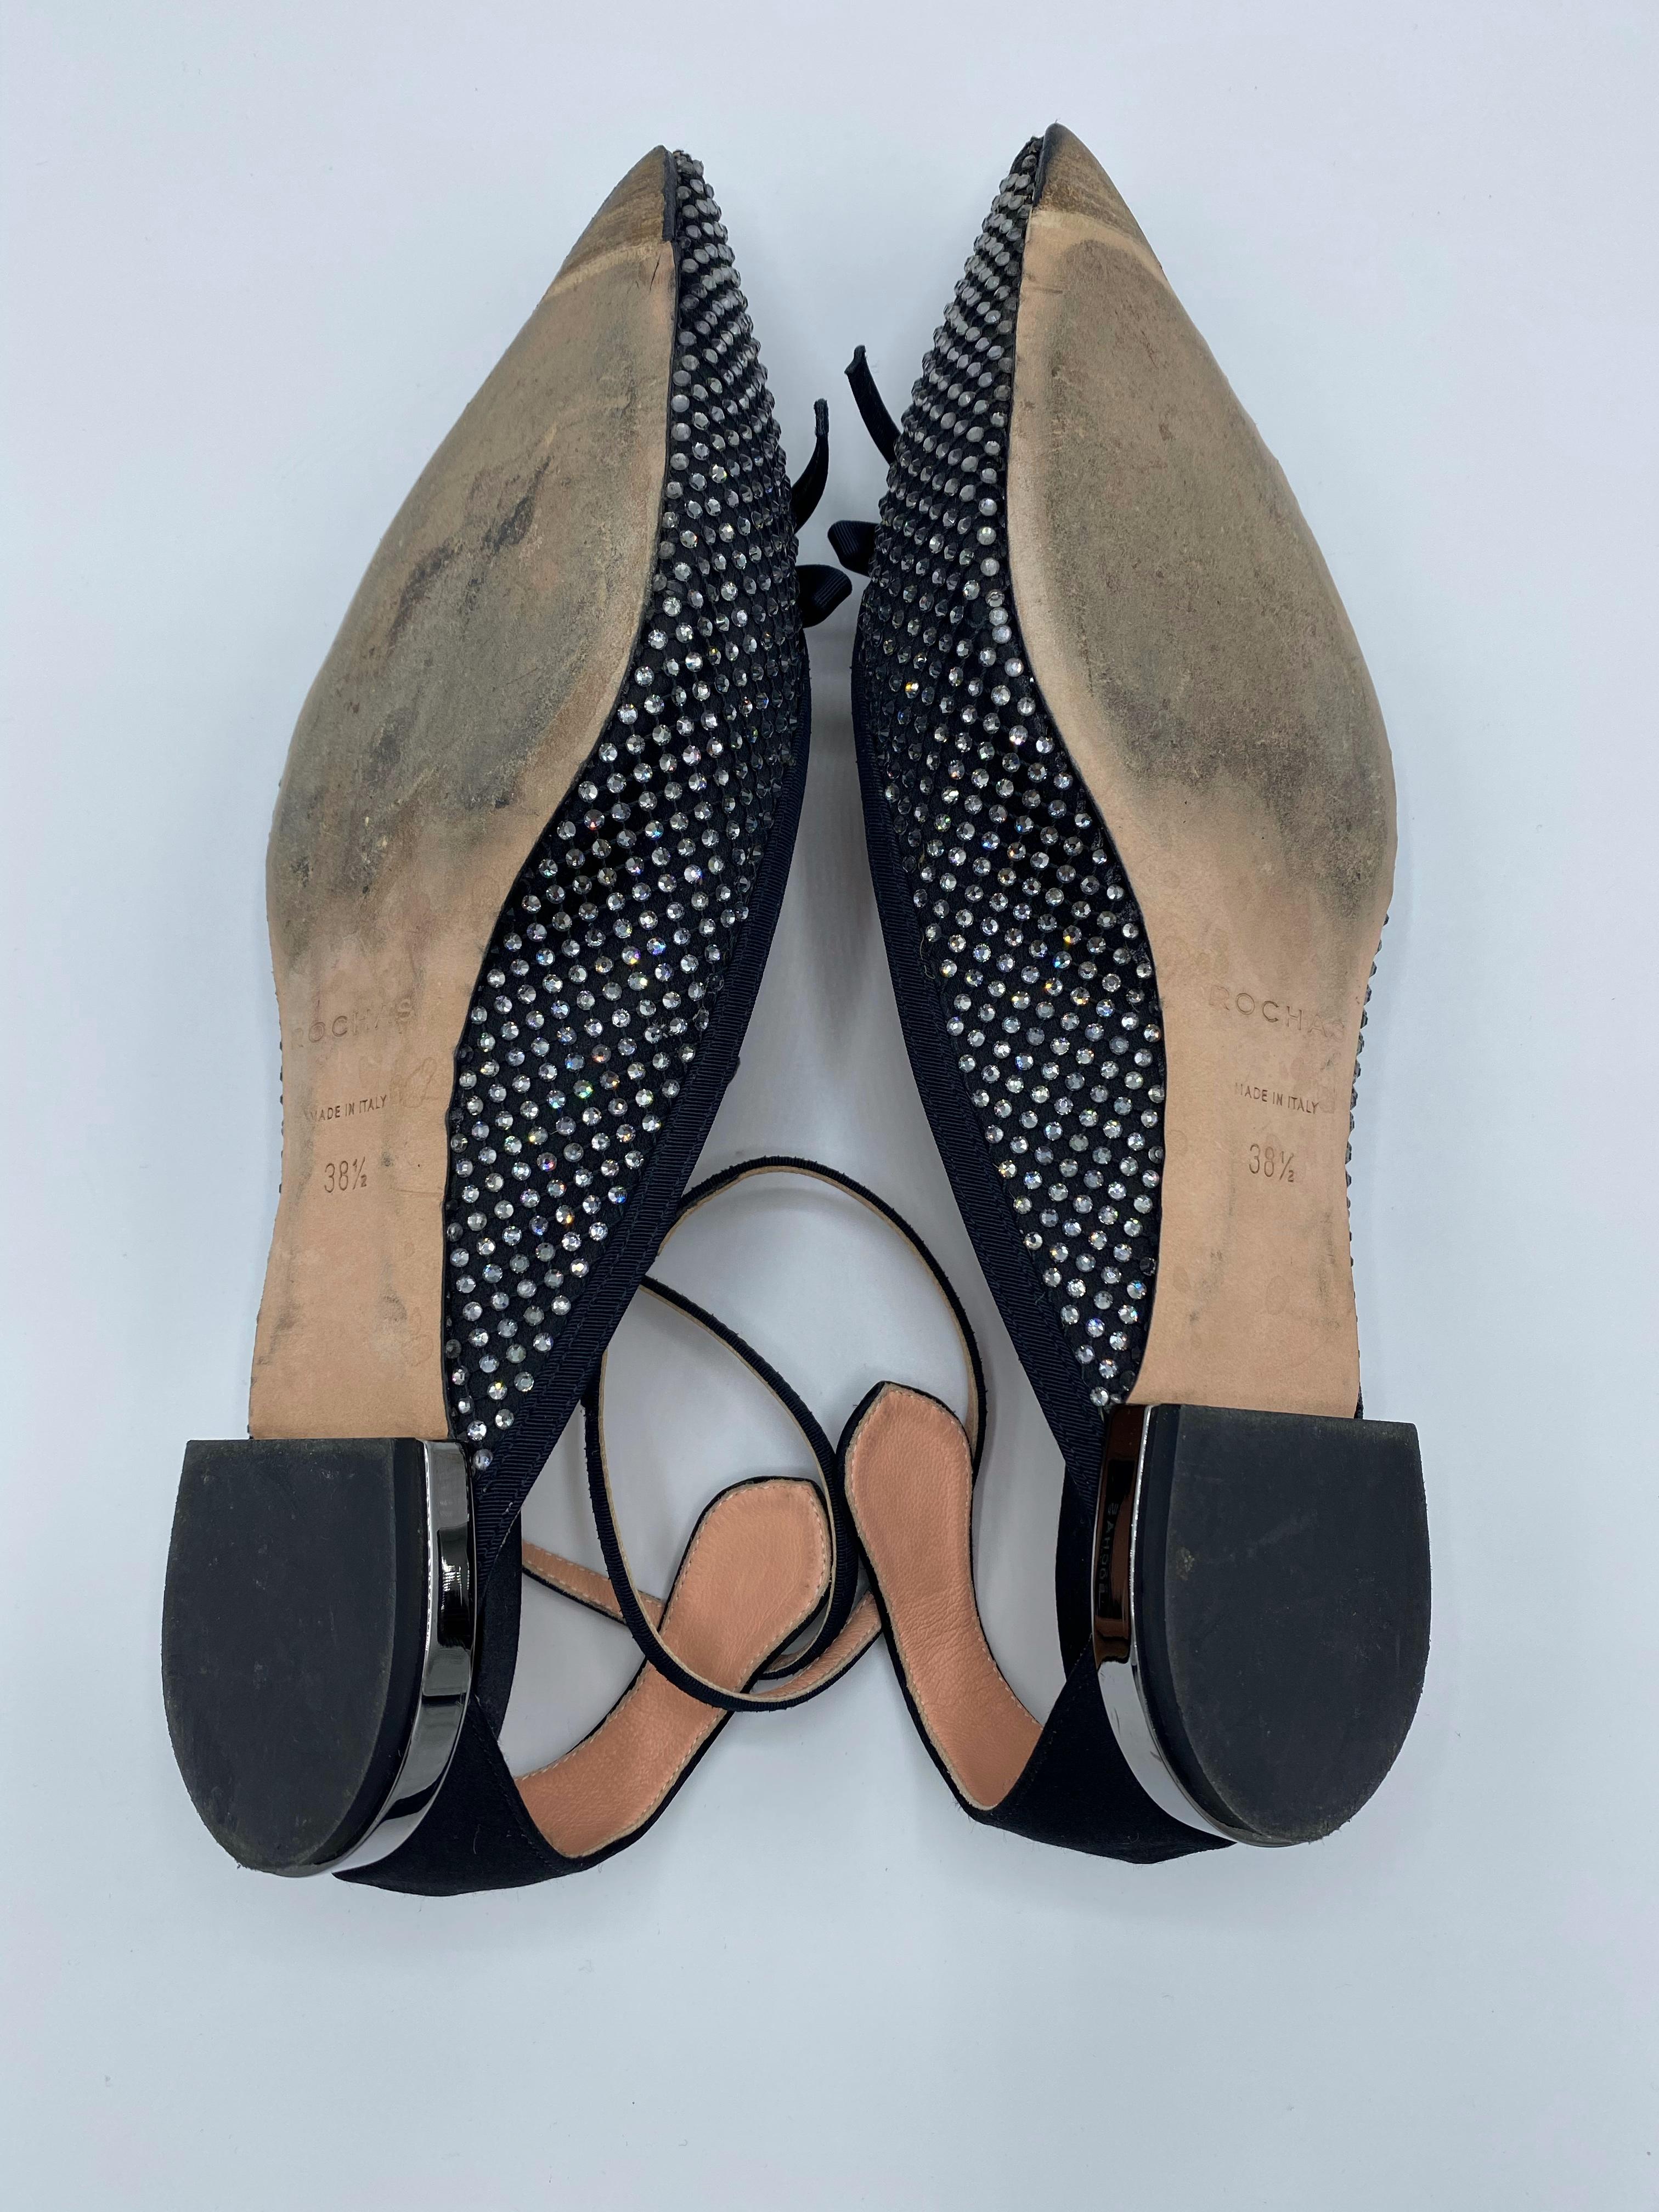 Rochas Paris Satin Grain and Black Pointed Toe Flats, Size 38.5 For Sale 4